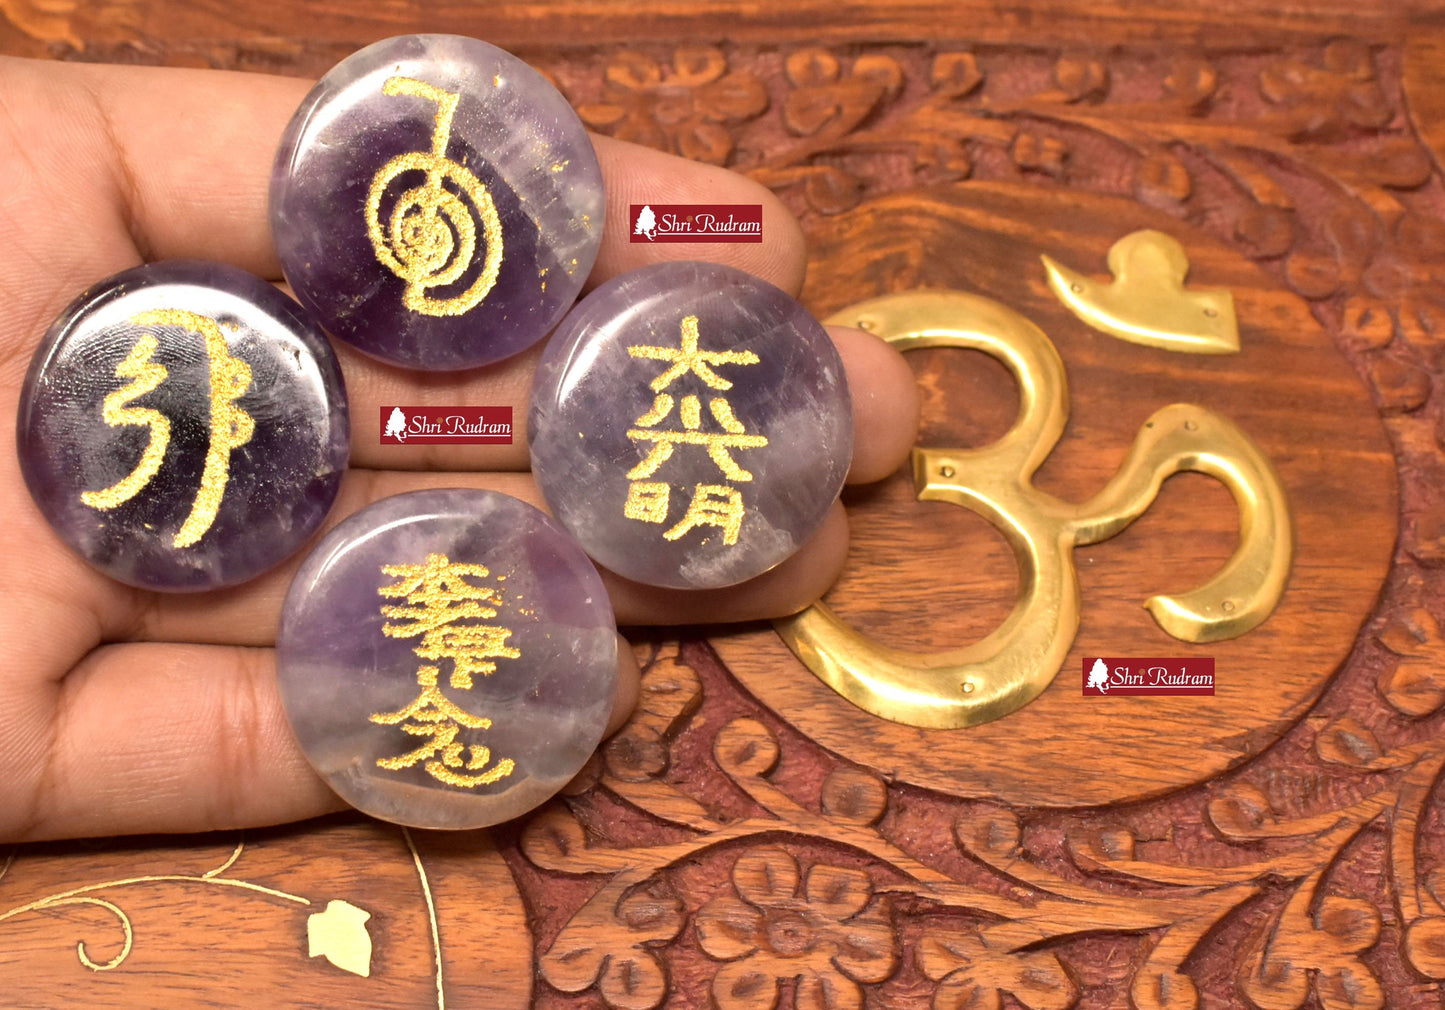 Amethyst Stone Set of 4 Pcs with Usui Reiki Symbols , Reiki Disc Set, Engraved Usui Reiki Symbols Disc Set, Healing Crystals, Palm Stone